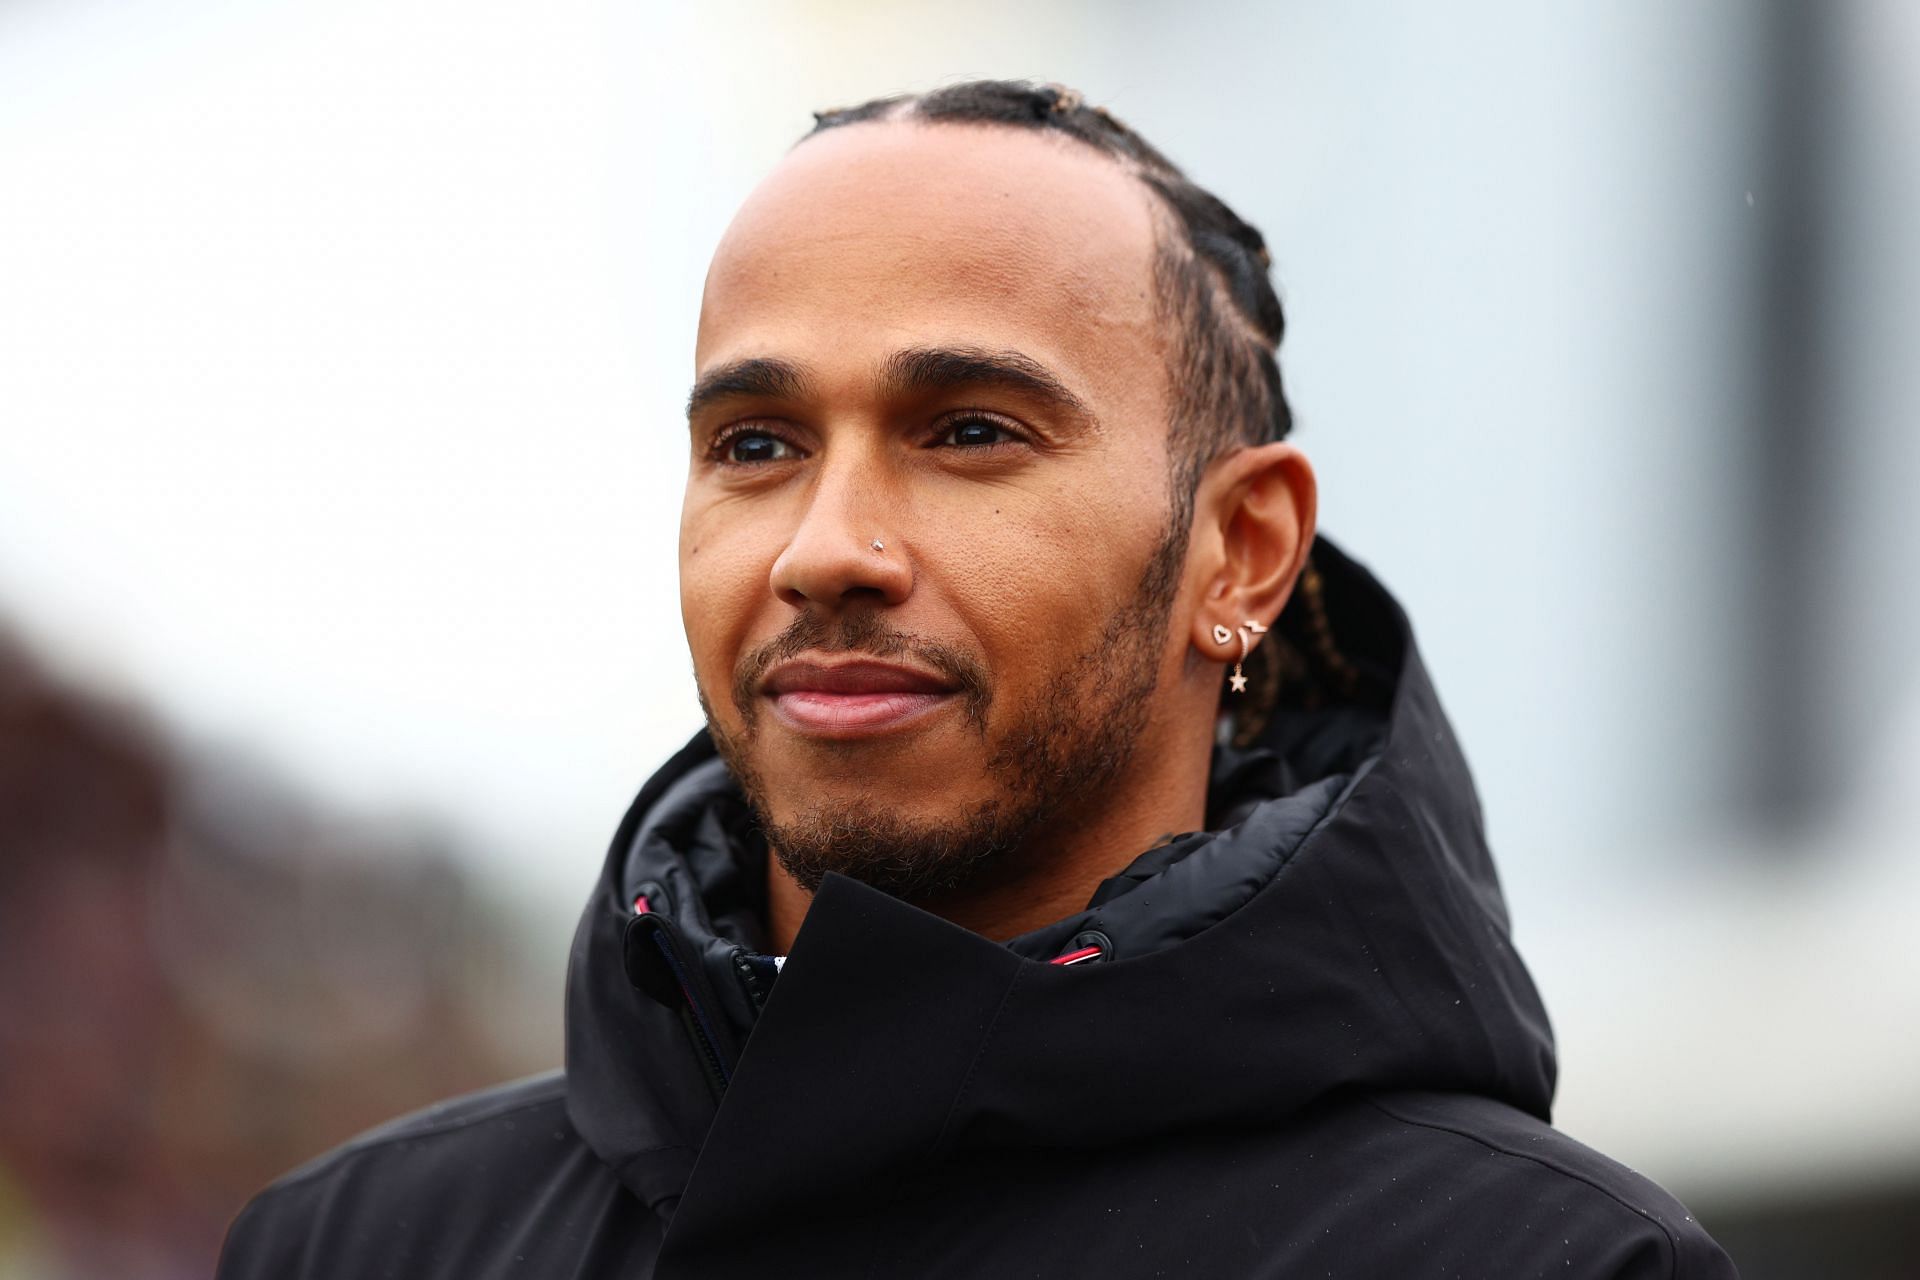 Lewis Hamilton looks on from the track during previews ahead of the F1 Grand Prix of Great Britain at Silverstone on June 30, 2022 in Northampton, England. (Photo by Clive Rose/Getty Images)